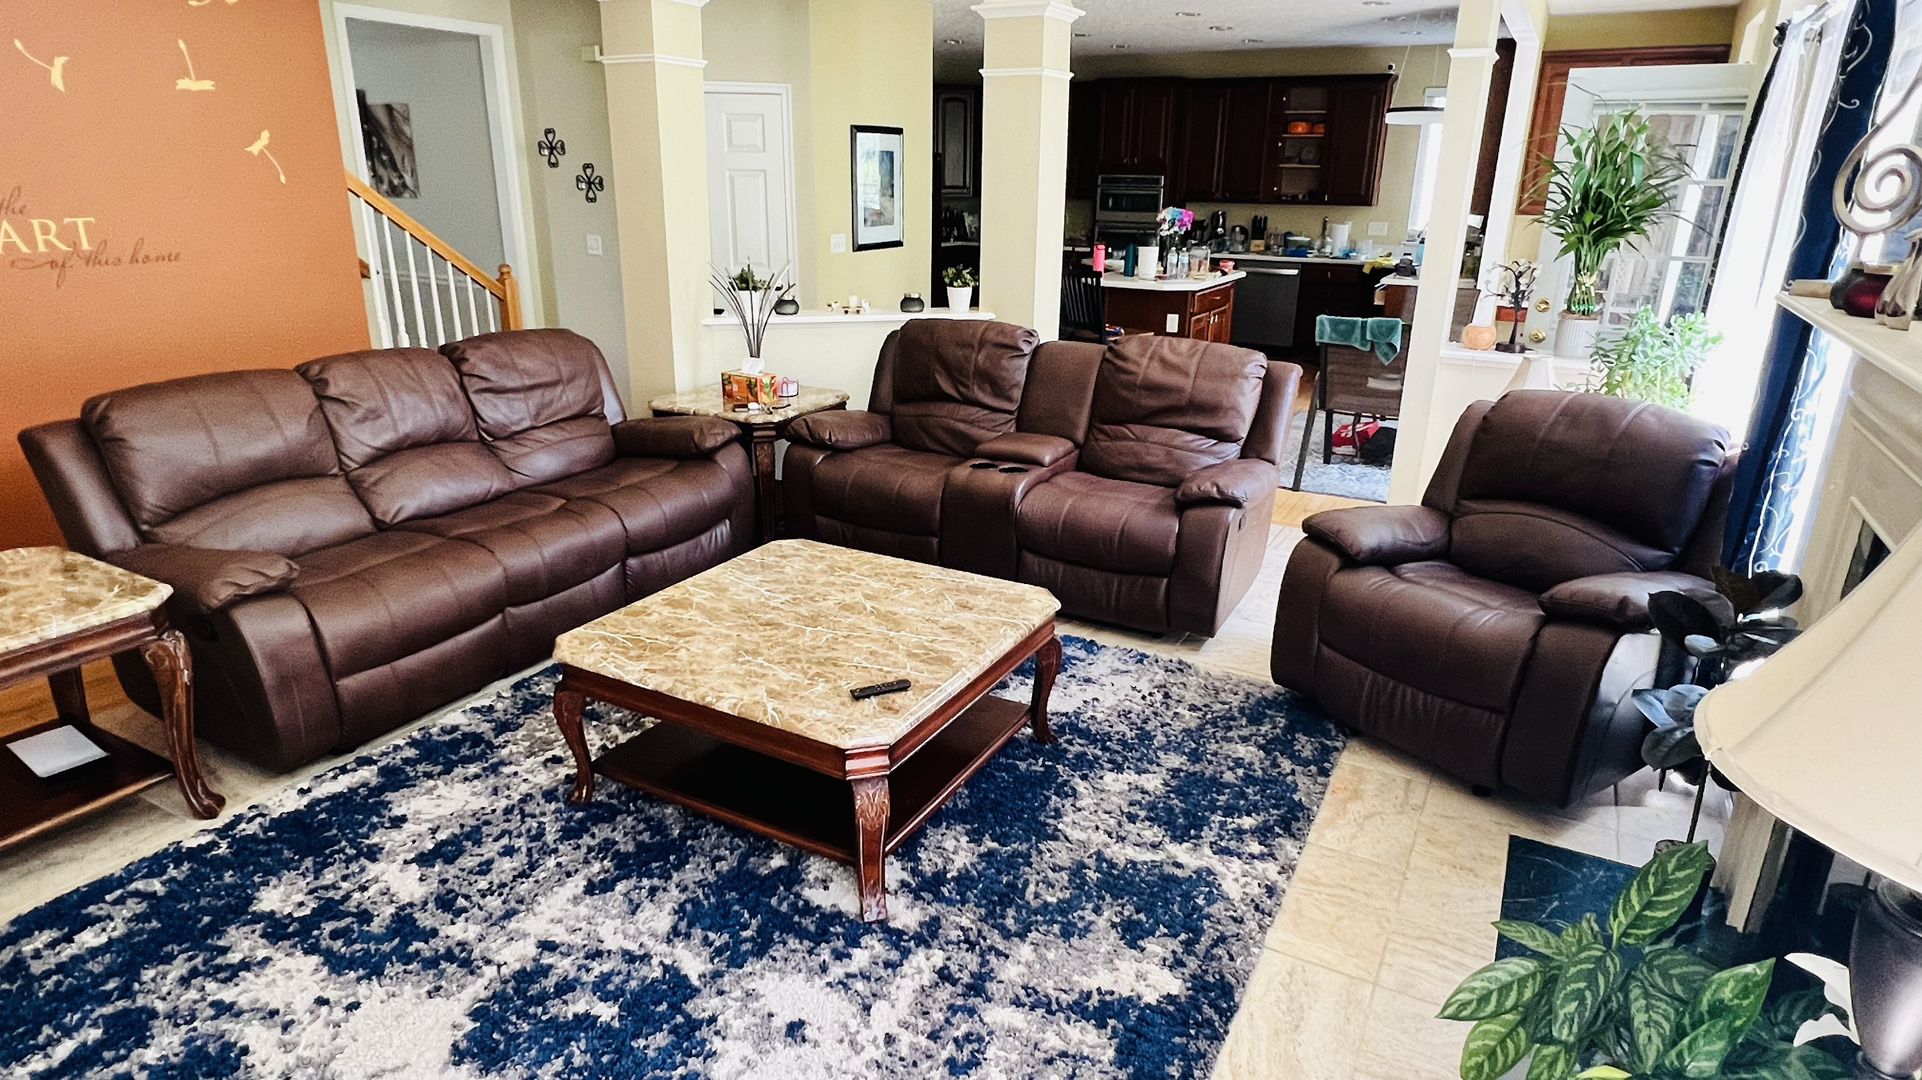 3-piece reclining living room set- sofa, loveseat, rocking chair- Each Piece Can be Sold Separately!! 